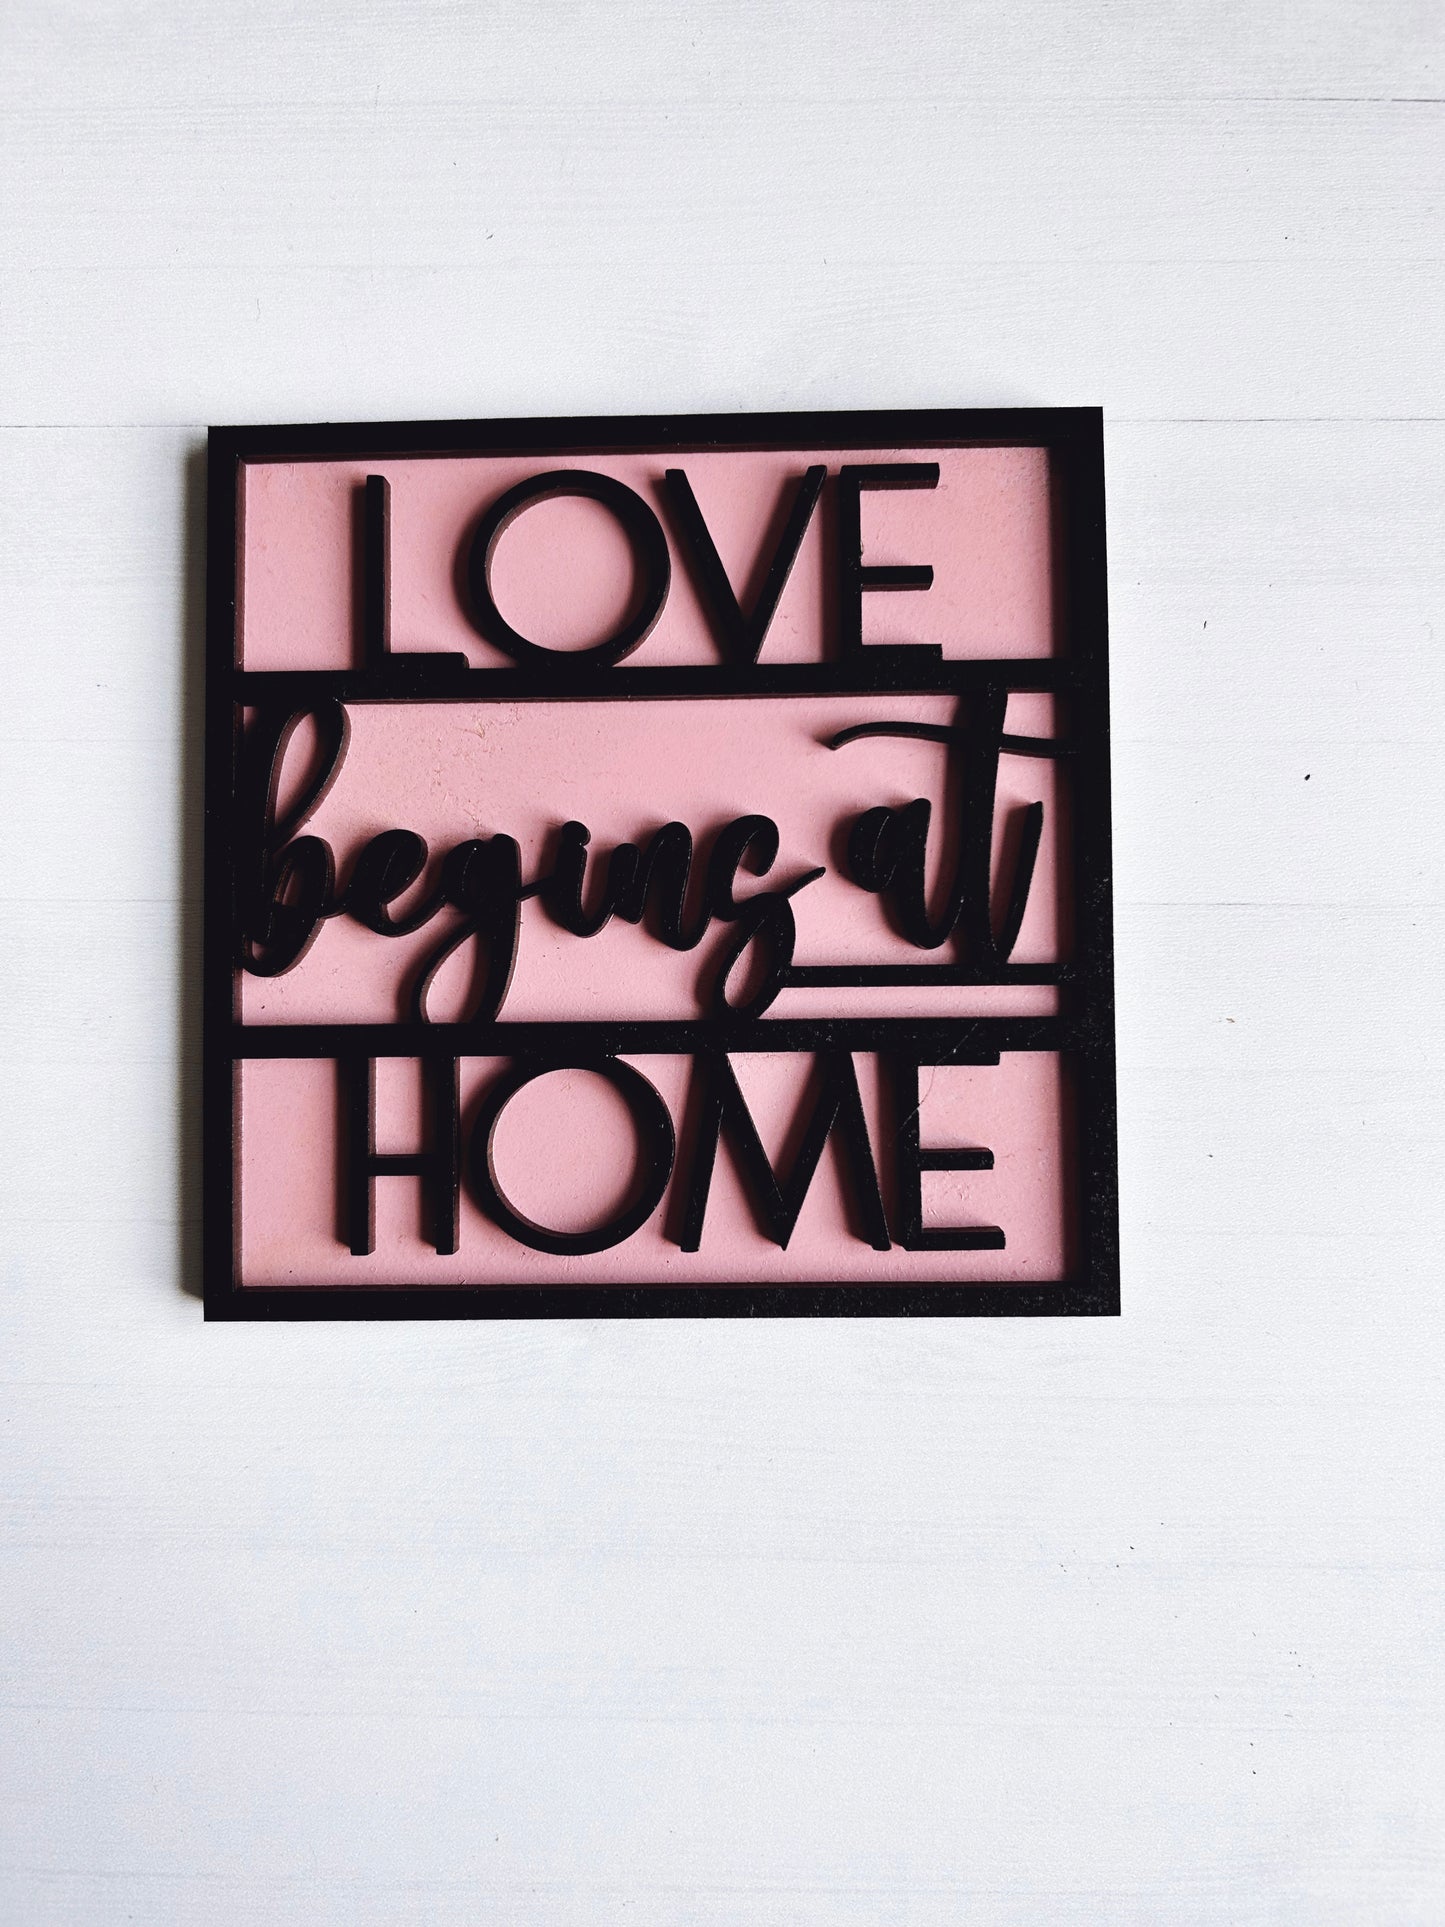 Love Begins at Home Everyday Interchangeable tile